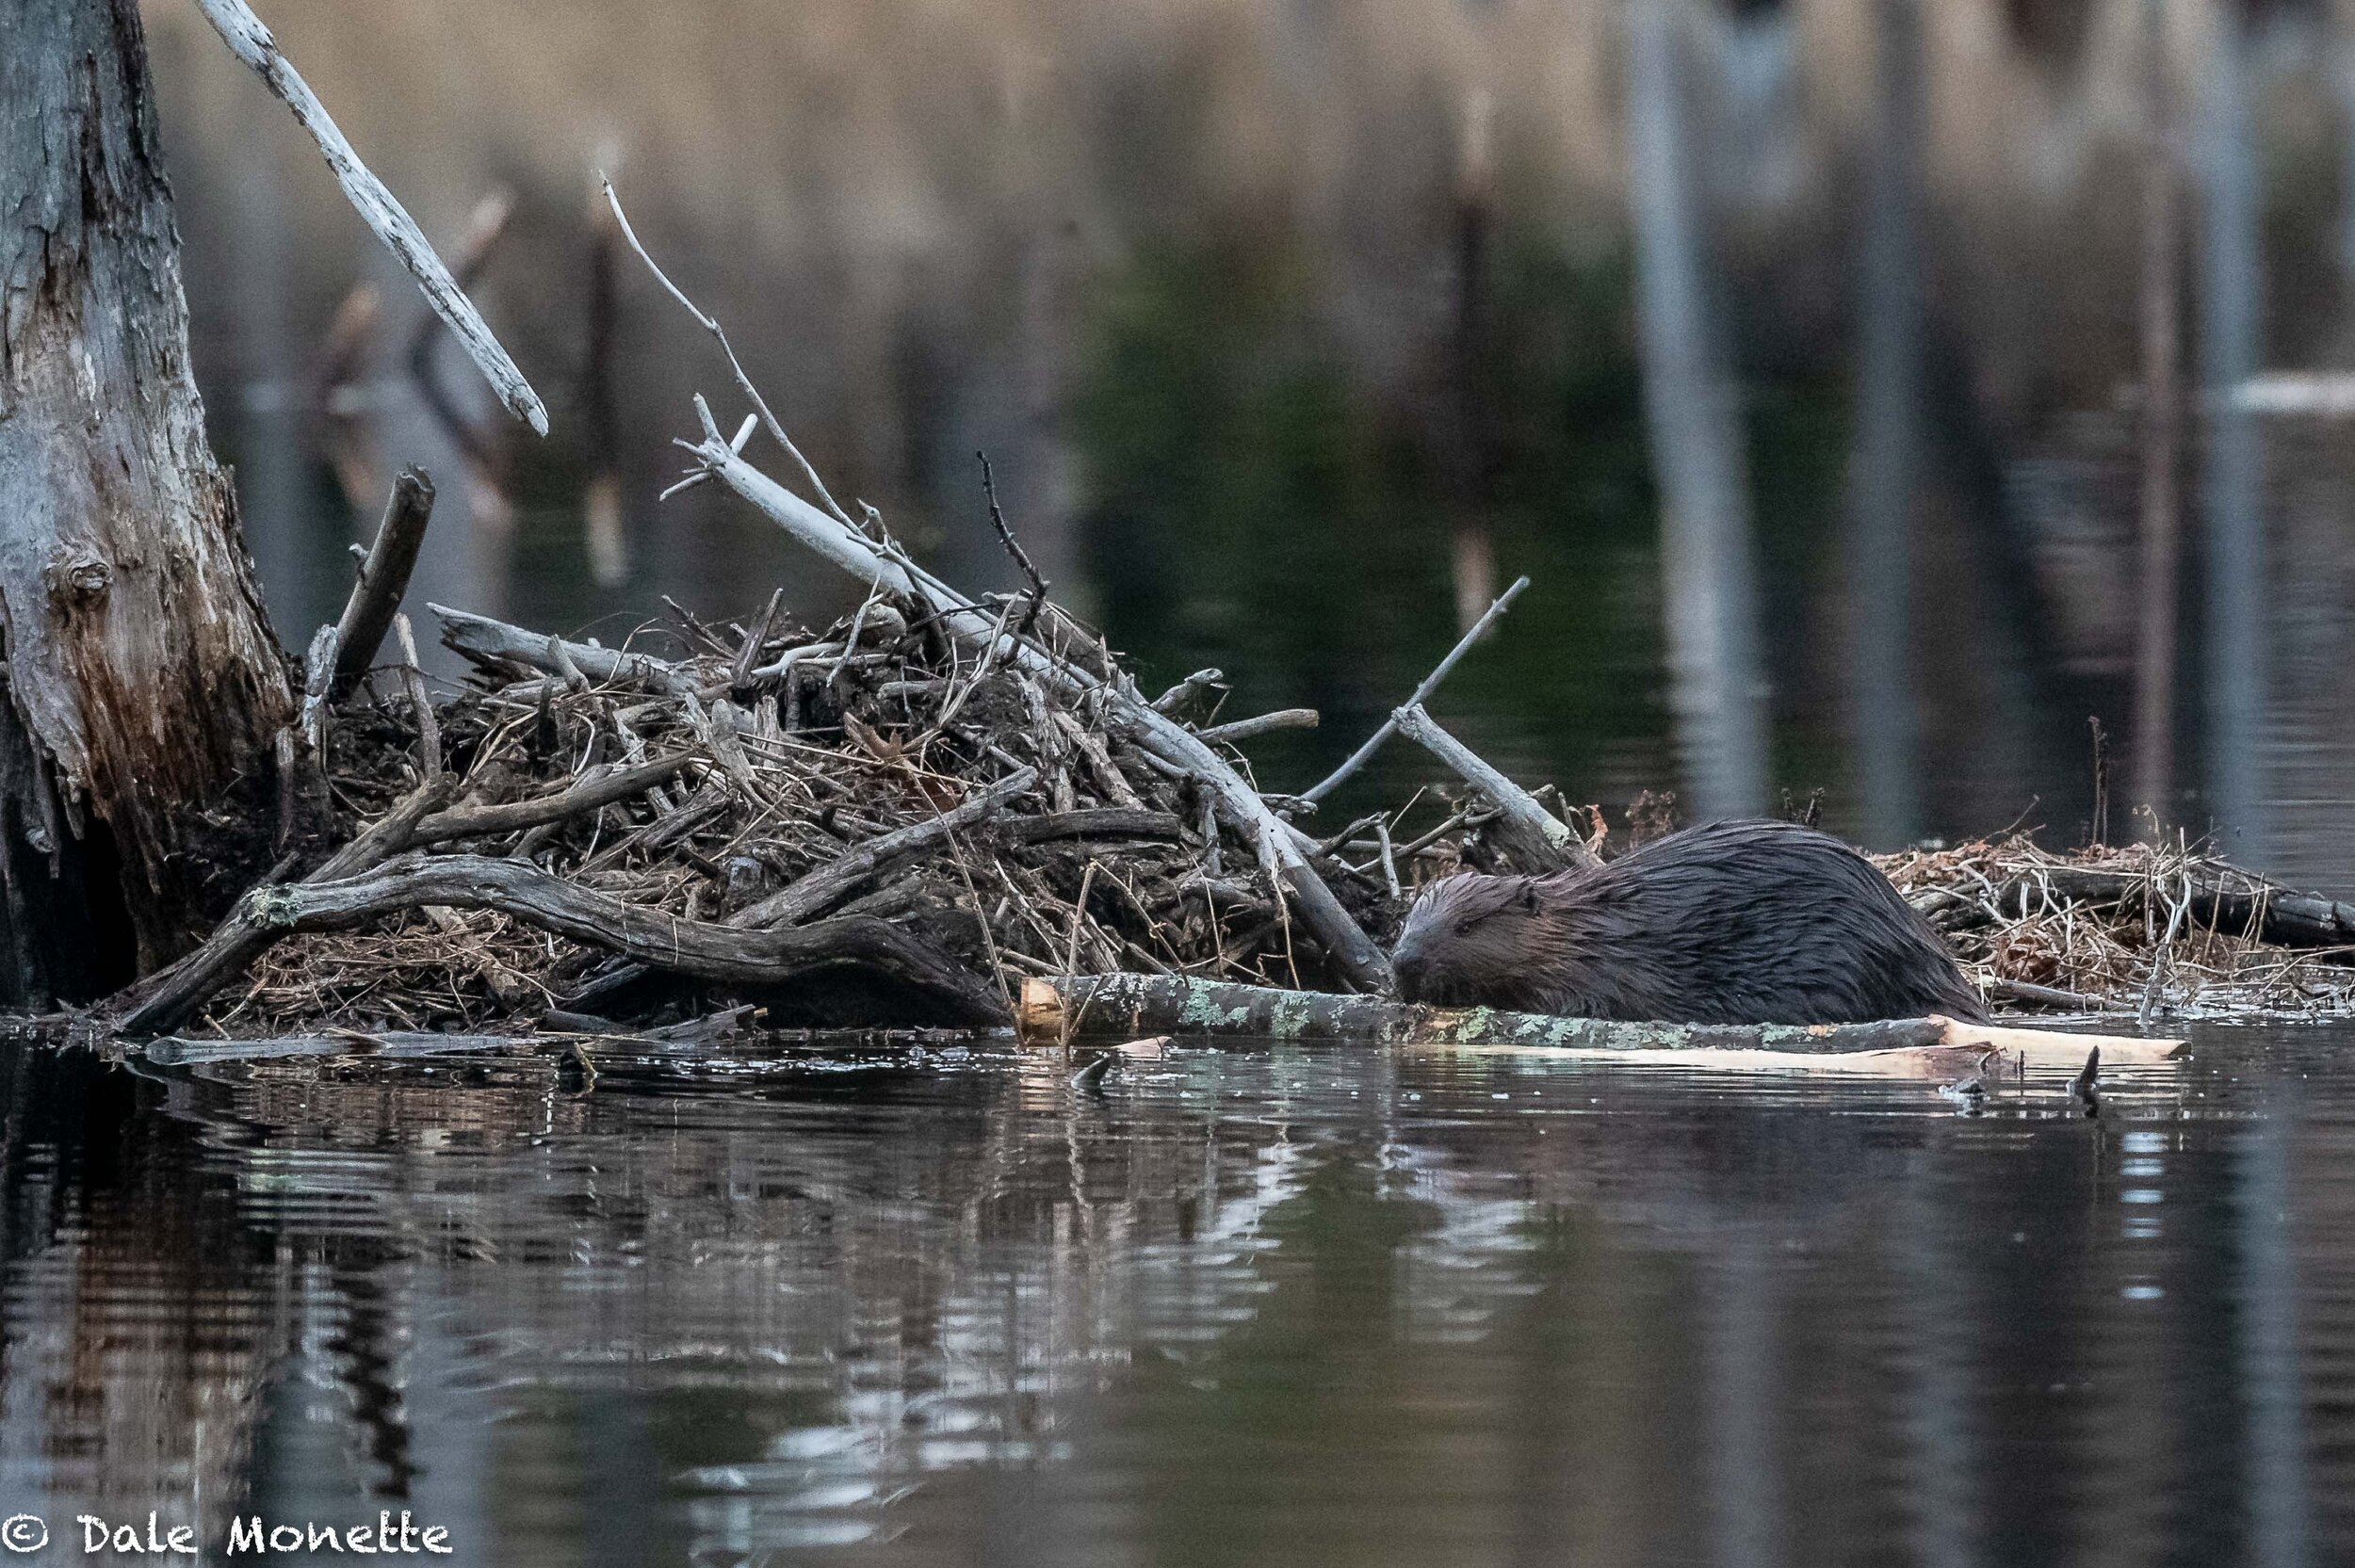   Although this beaver looks like he’s bitten off more than he can chew. He will come back again and again, or drag it to stash on their lodge.  